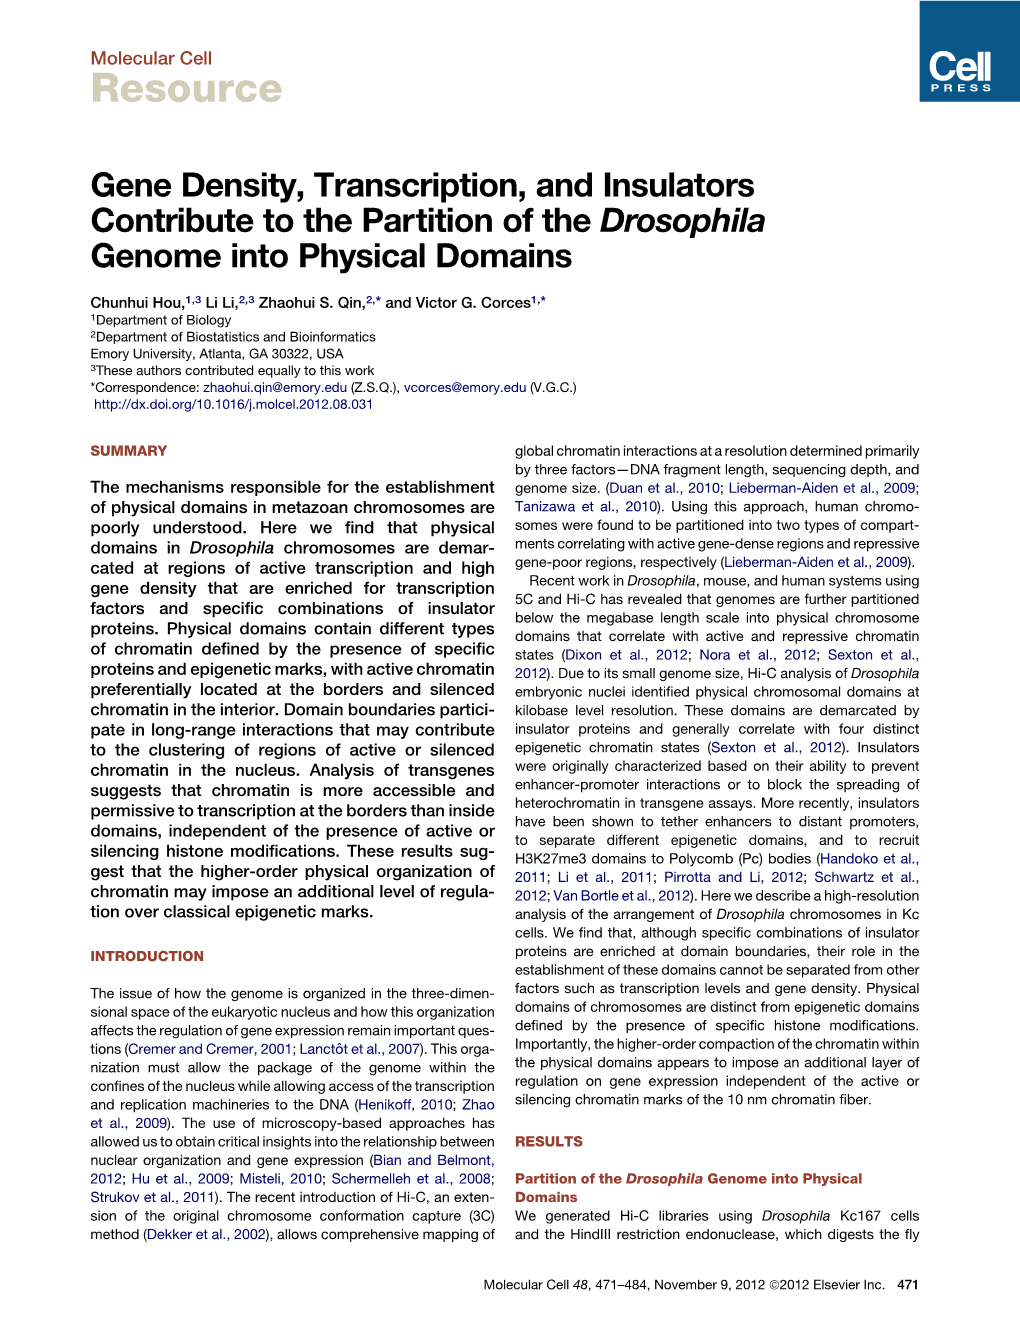 Gene Density, Transcription, and Insulators Contribute to the Partition of the Drosophila Genome Into Physical Domains